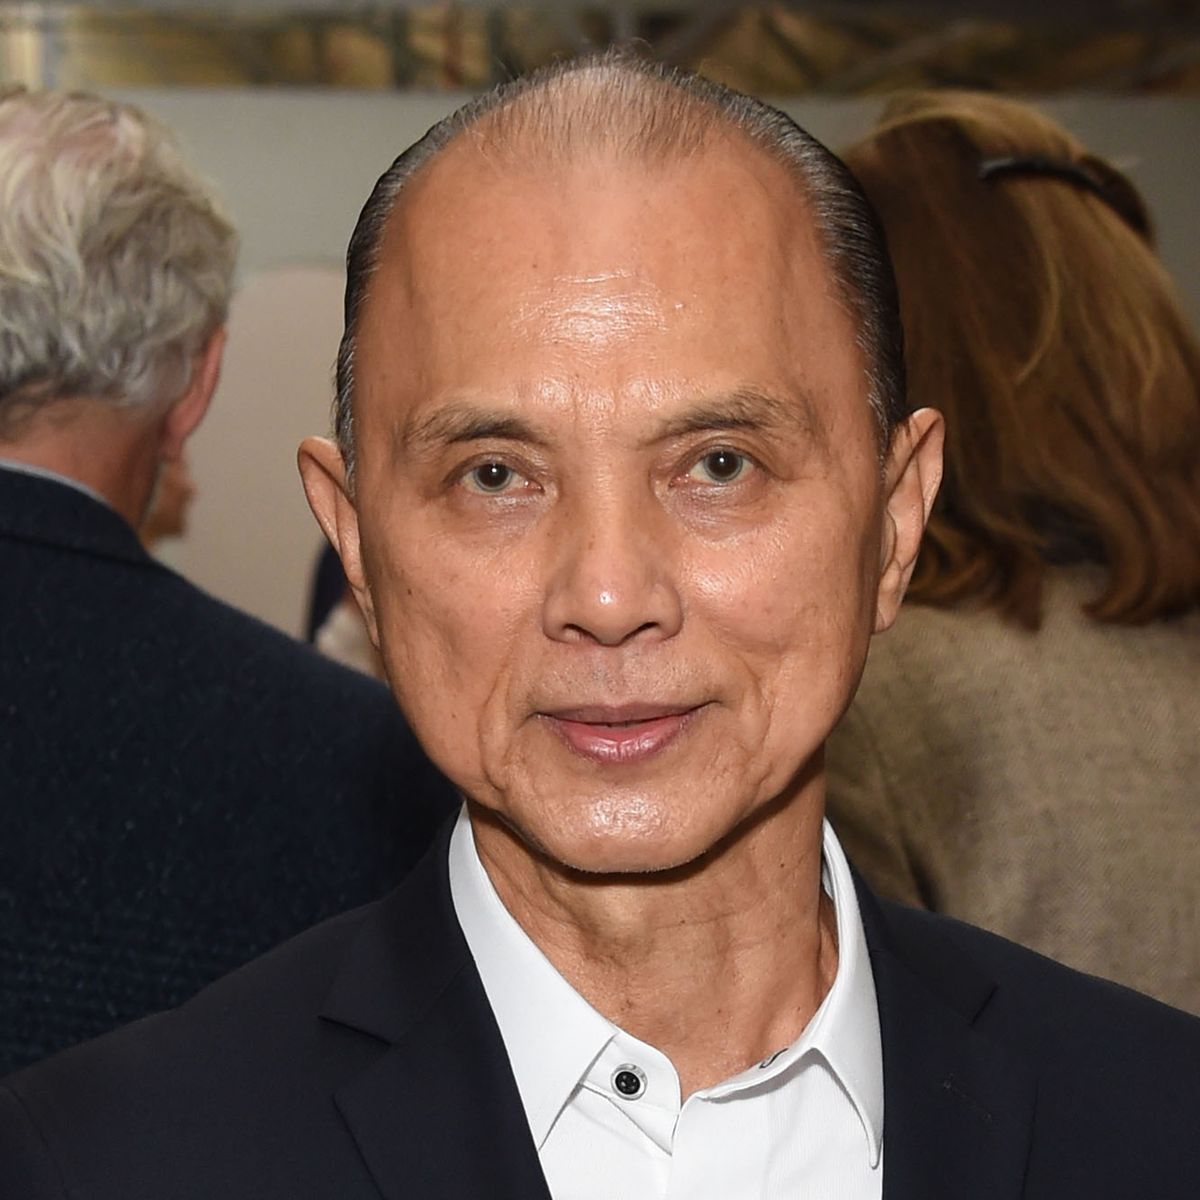 Jimmy Choo - Shoes, Career & Facts